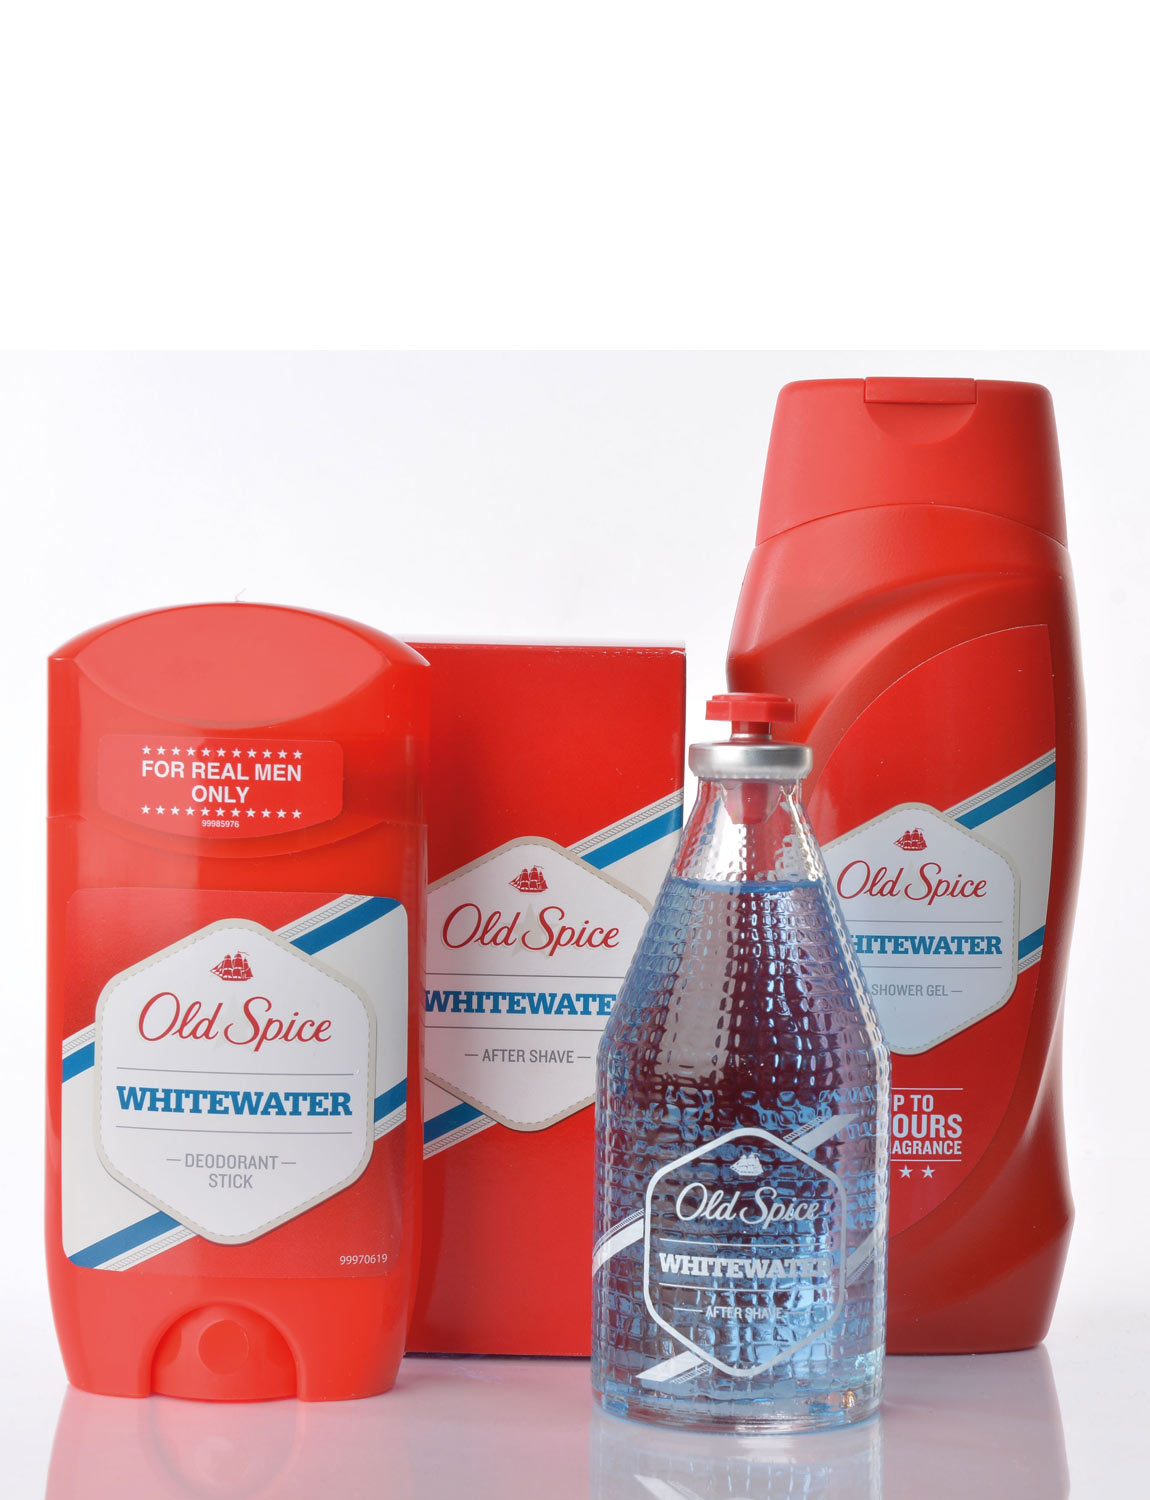 Old Spice Aftershave Gift Set - Picture 1 of 1